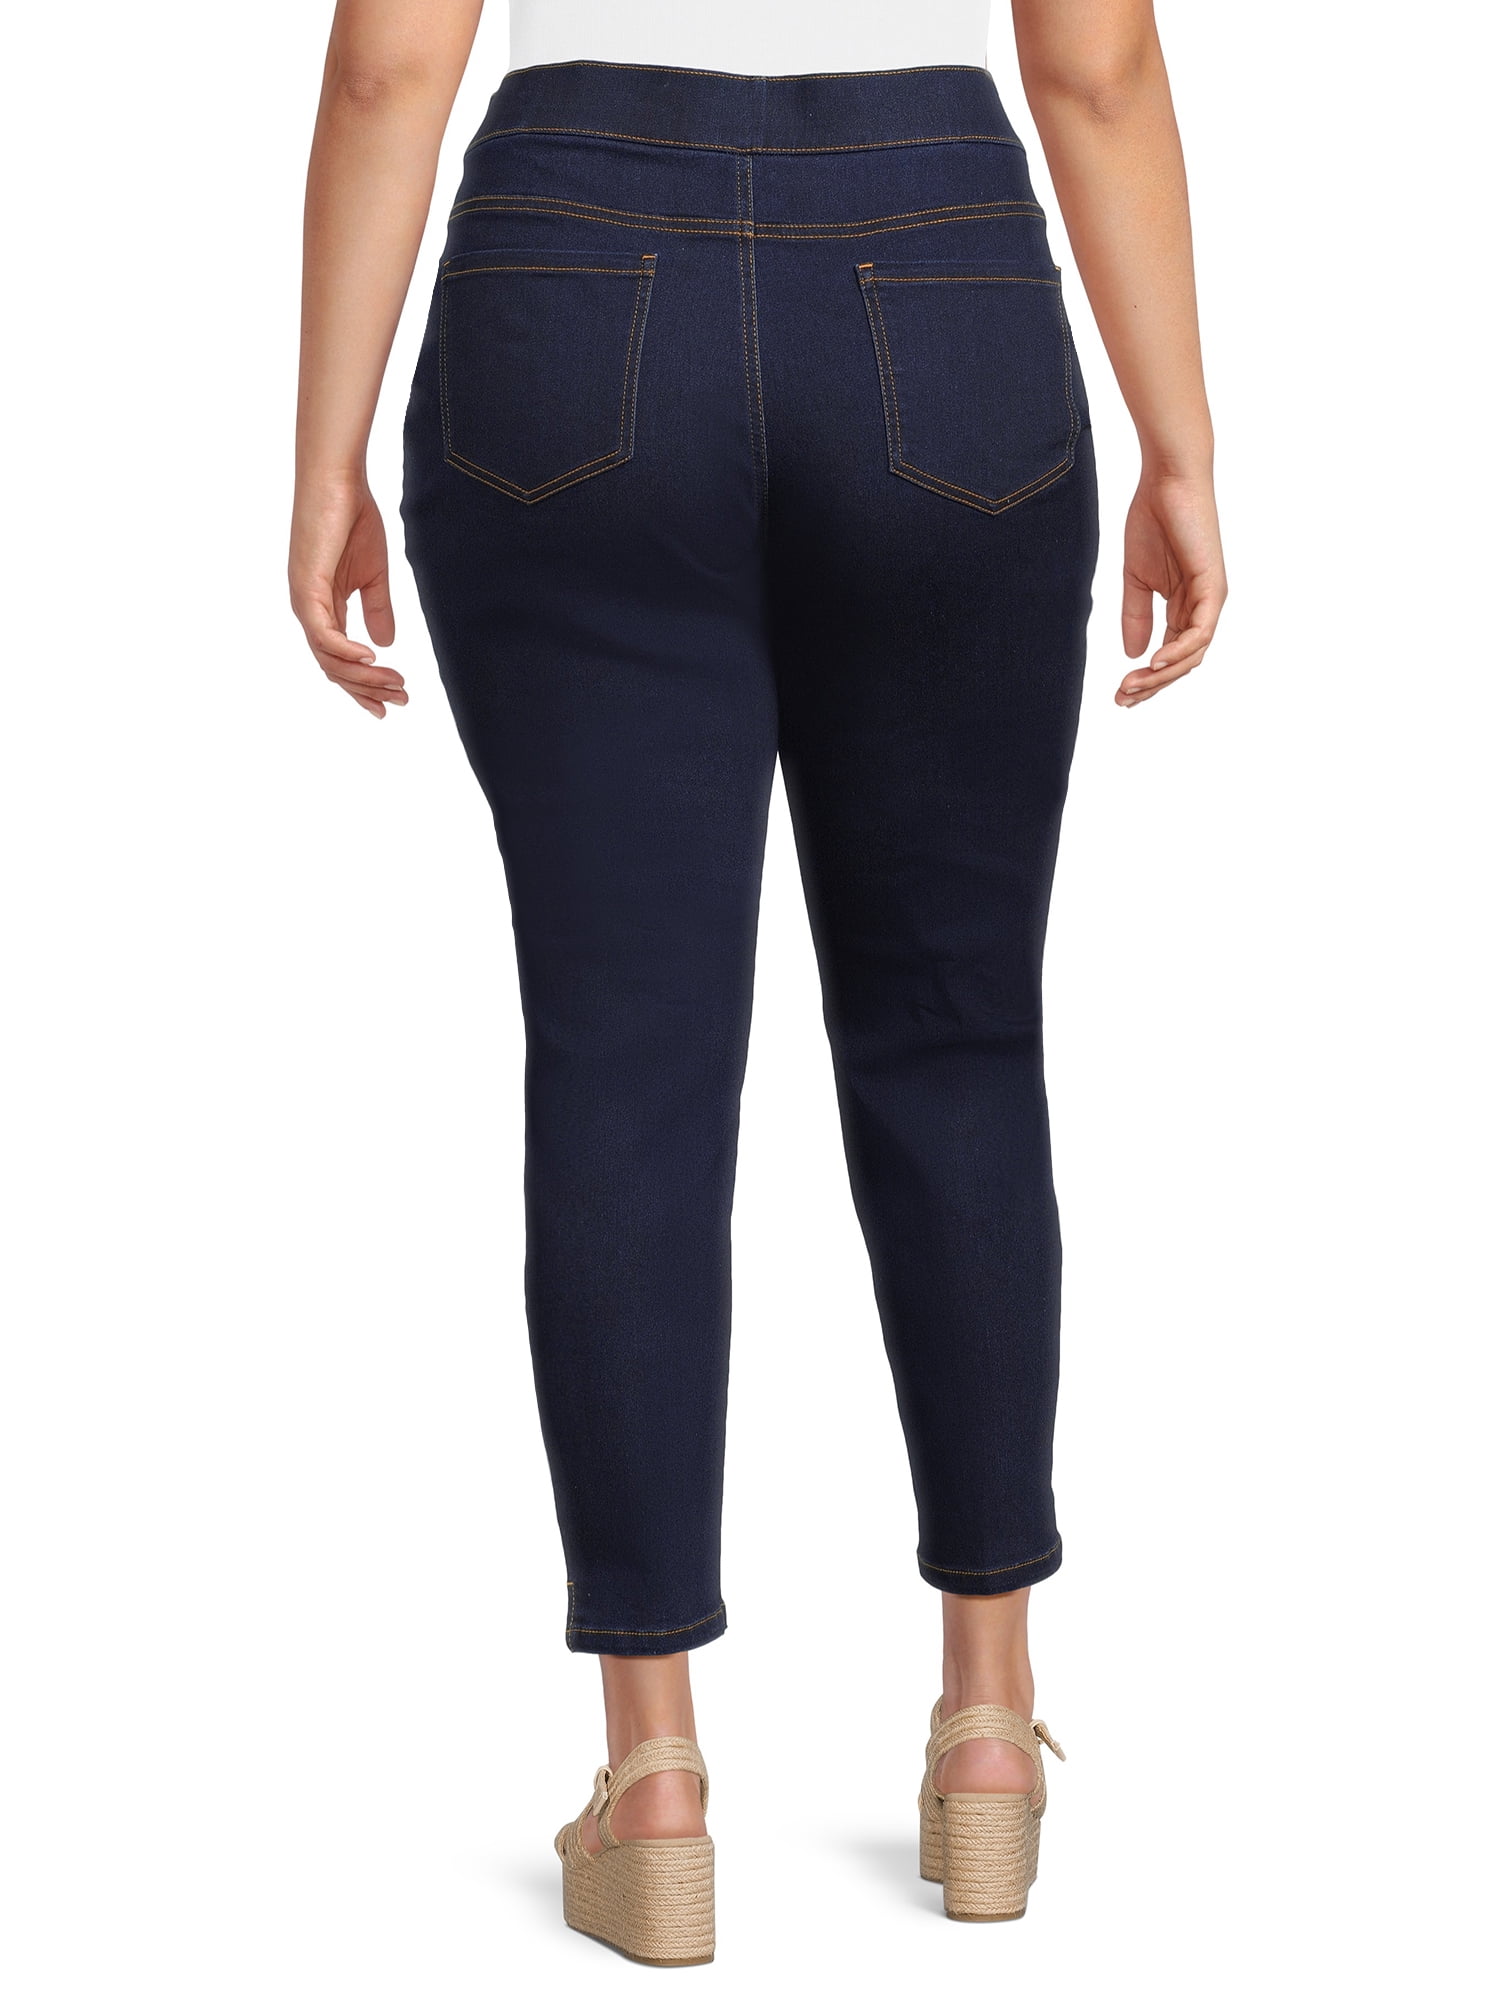 The Pioneer Woman Denim Pull On Stretch Jeggings, Women's